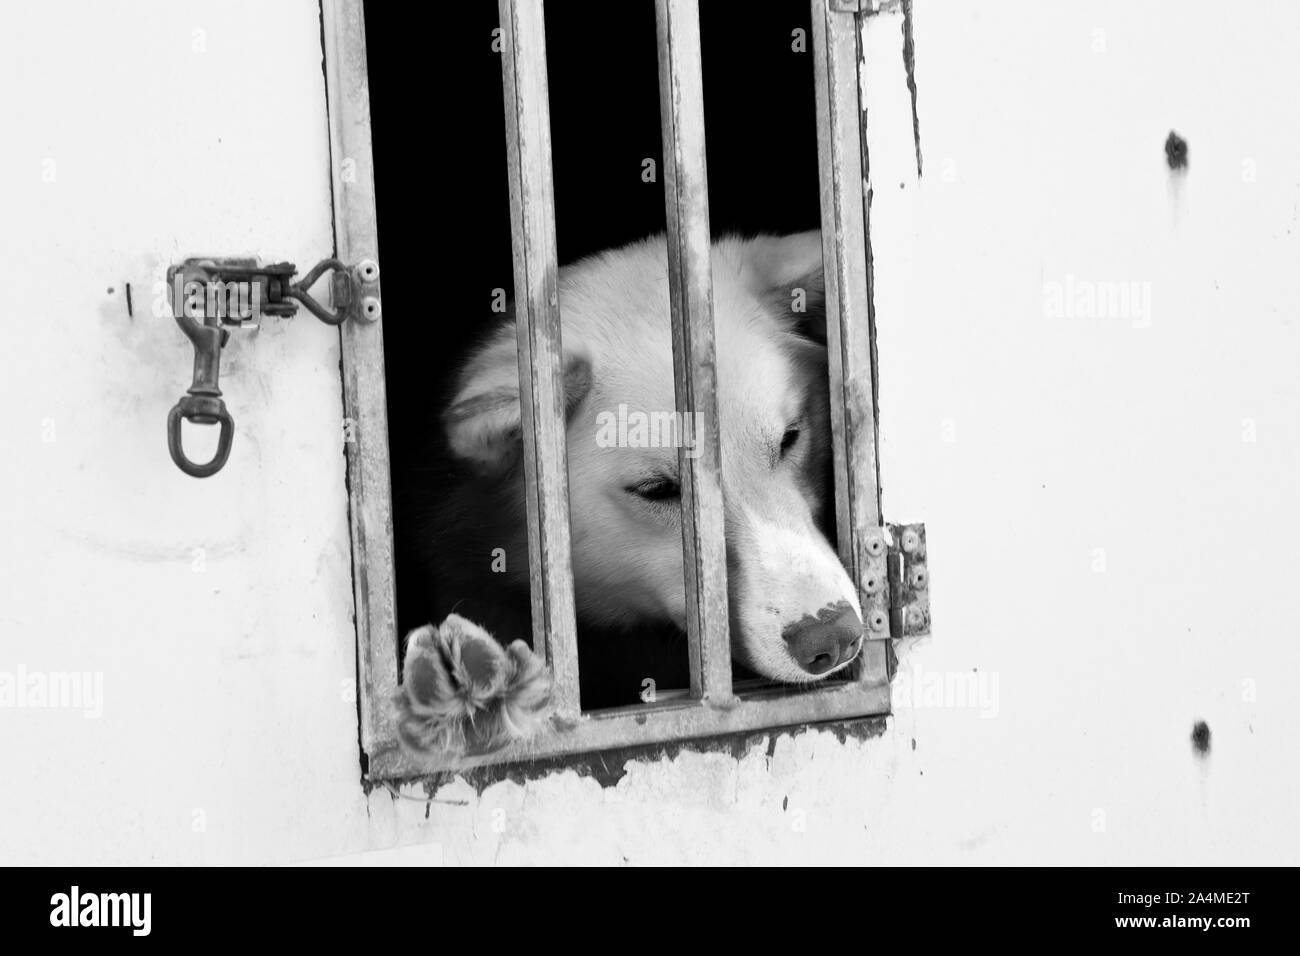 Cage Black and White Stock Photos & Images - Alamy